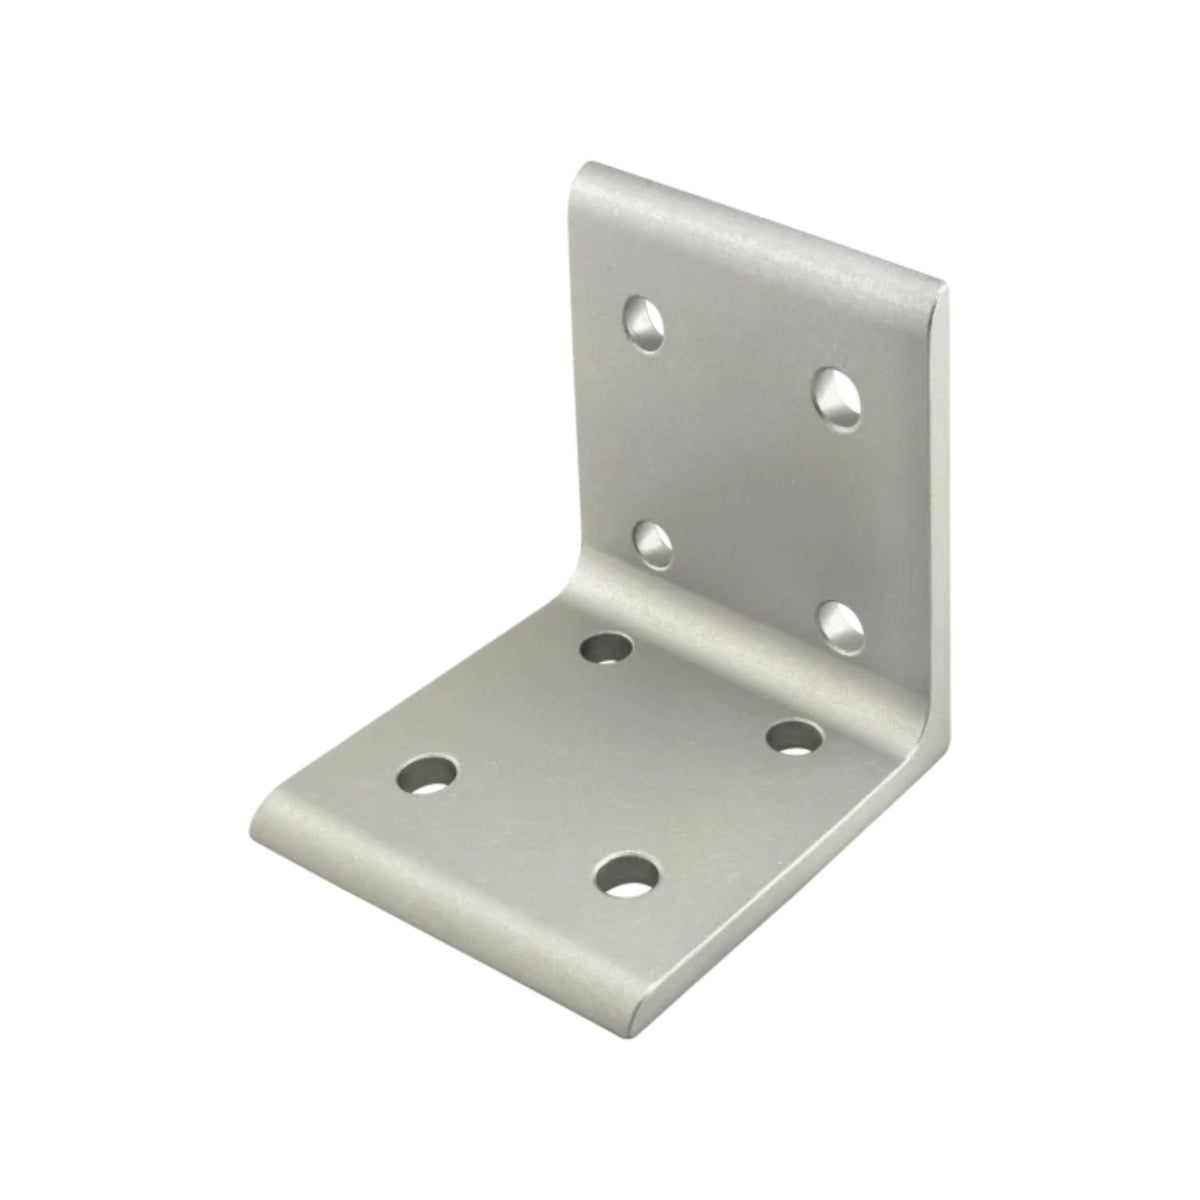 aluminum corner bracket with two square sides, each with four mounting holes